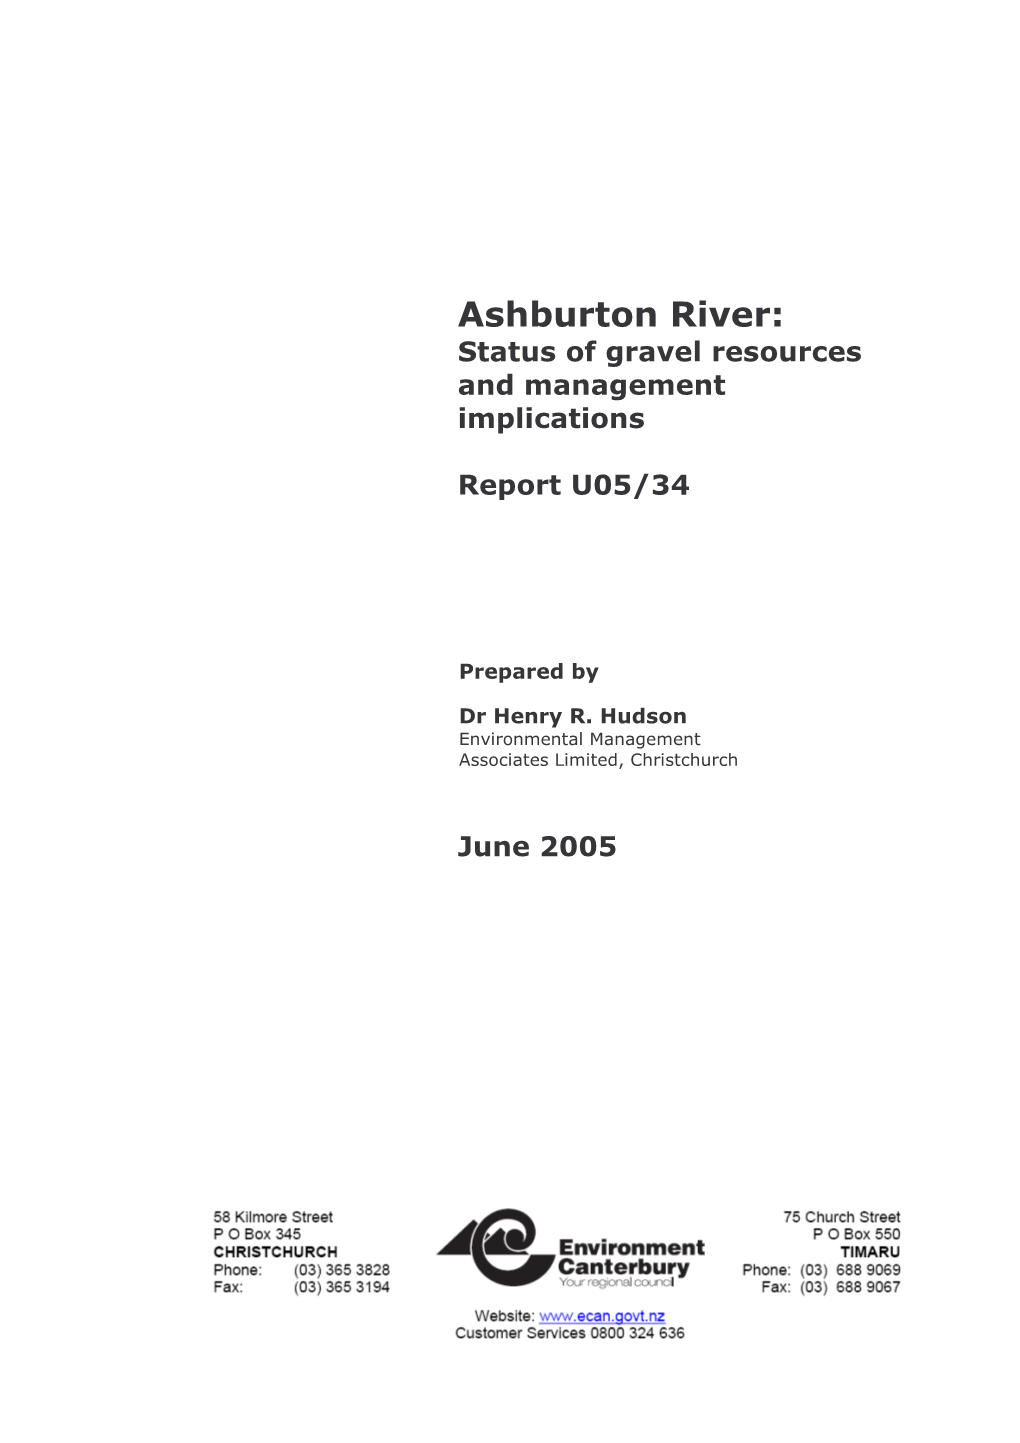 Ashburton River: Status of Gravel Resources and Management Implications